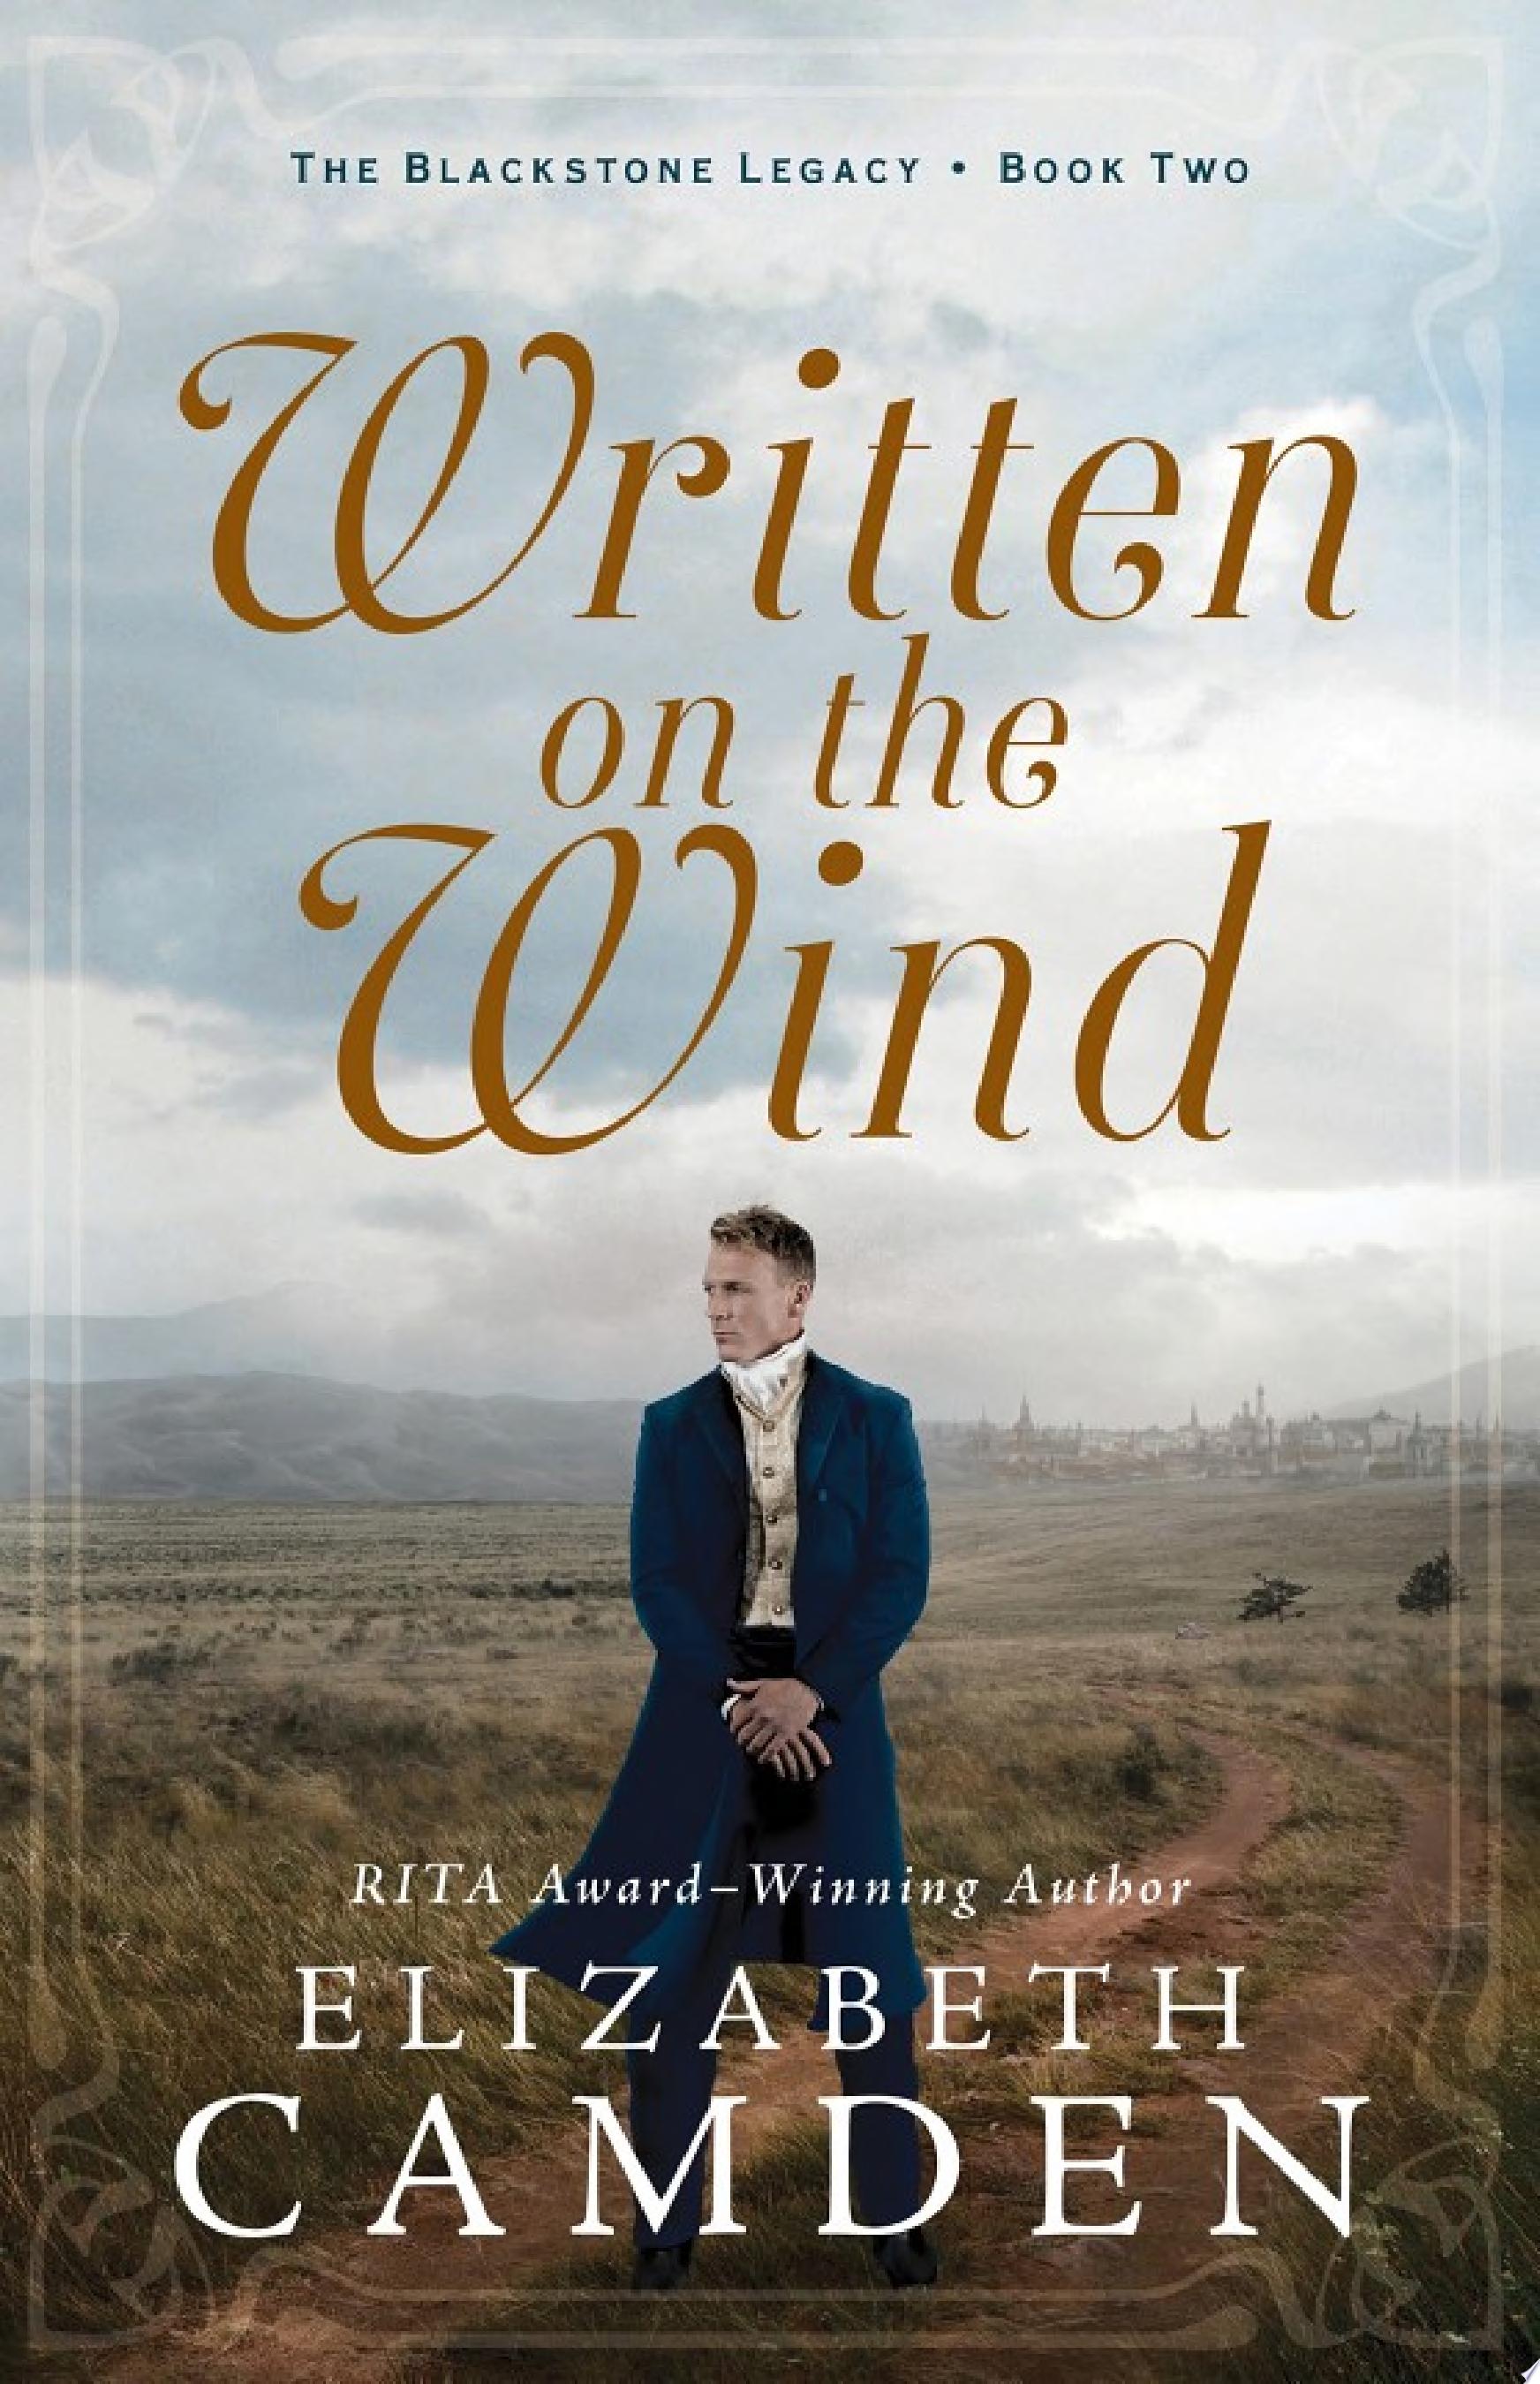 Image for "Written on the Wind"